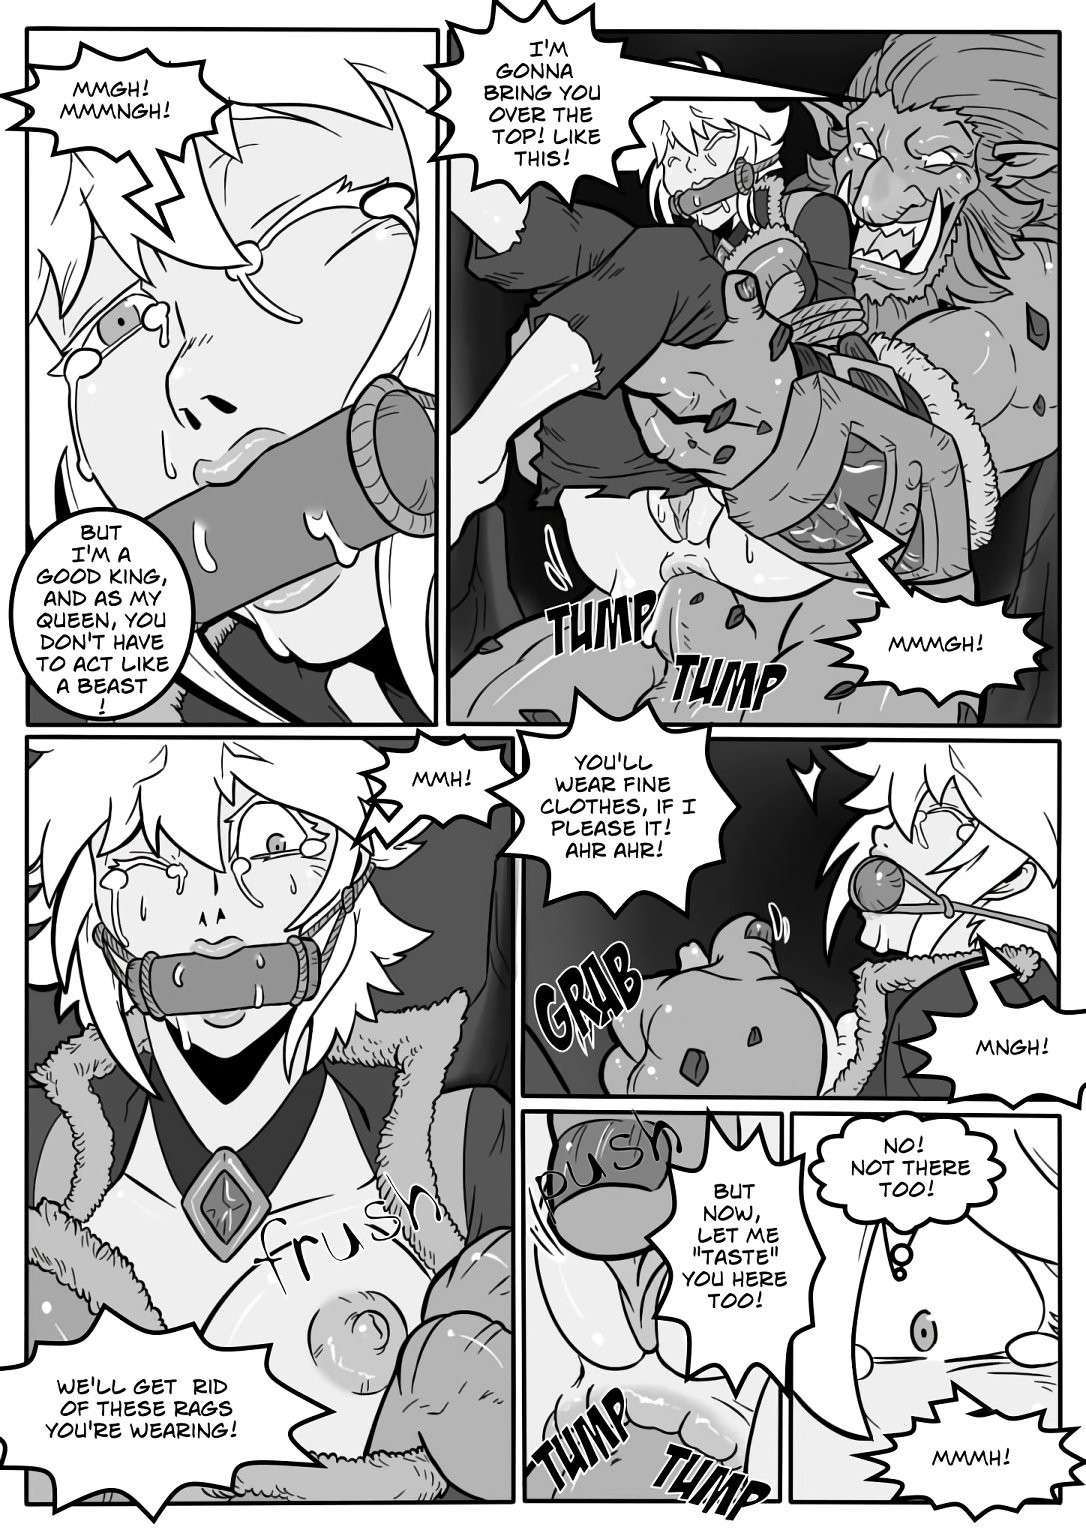 Tales of the Troll King 2 porn comic picture 12